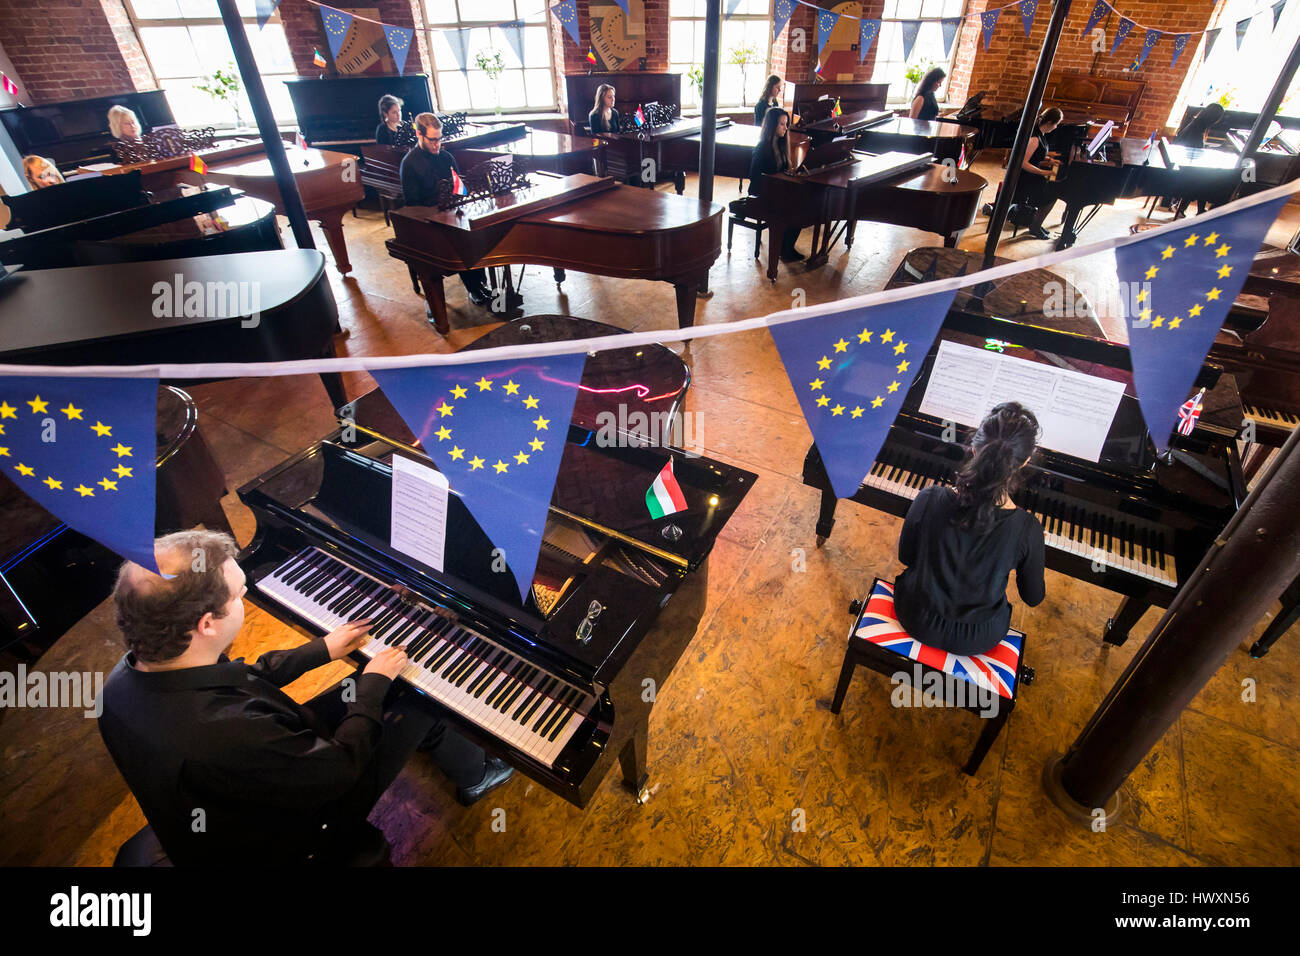 28 pianists, representing the members of the European Union, play 28 Steinways pianos symbolising Brexit at Besbrode Pianos in Leeds, during a preview of artwork 'European Unison' by artist Ruth Spencer Jolly. Stock Photo